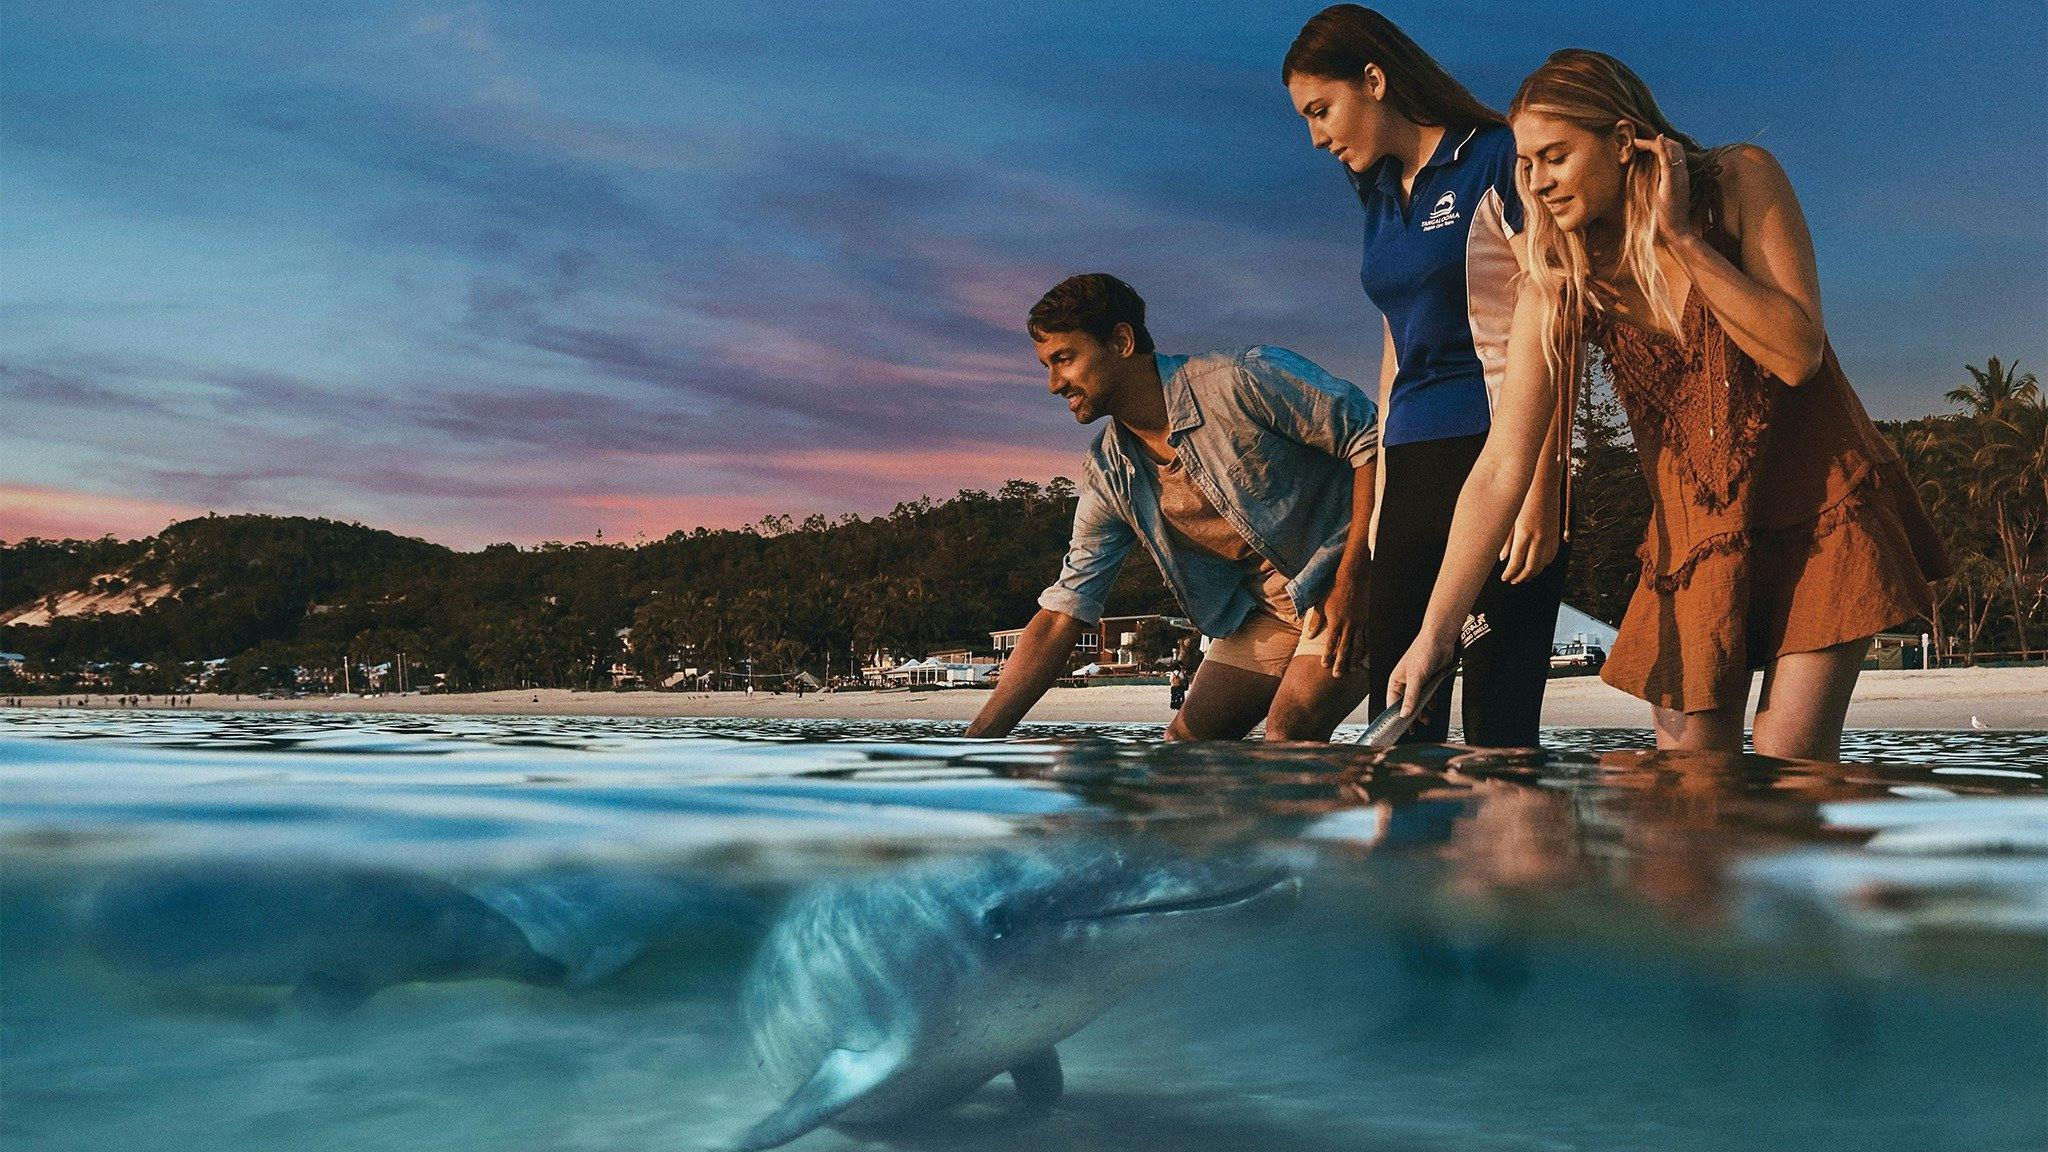 Wild Dolphin Feeding - Exclusive to guests of Tangalooma Island Resort. Conditions apply